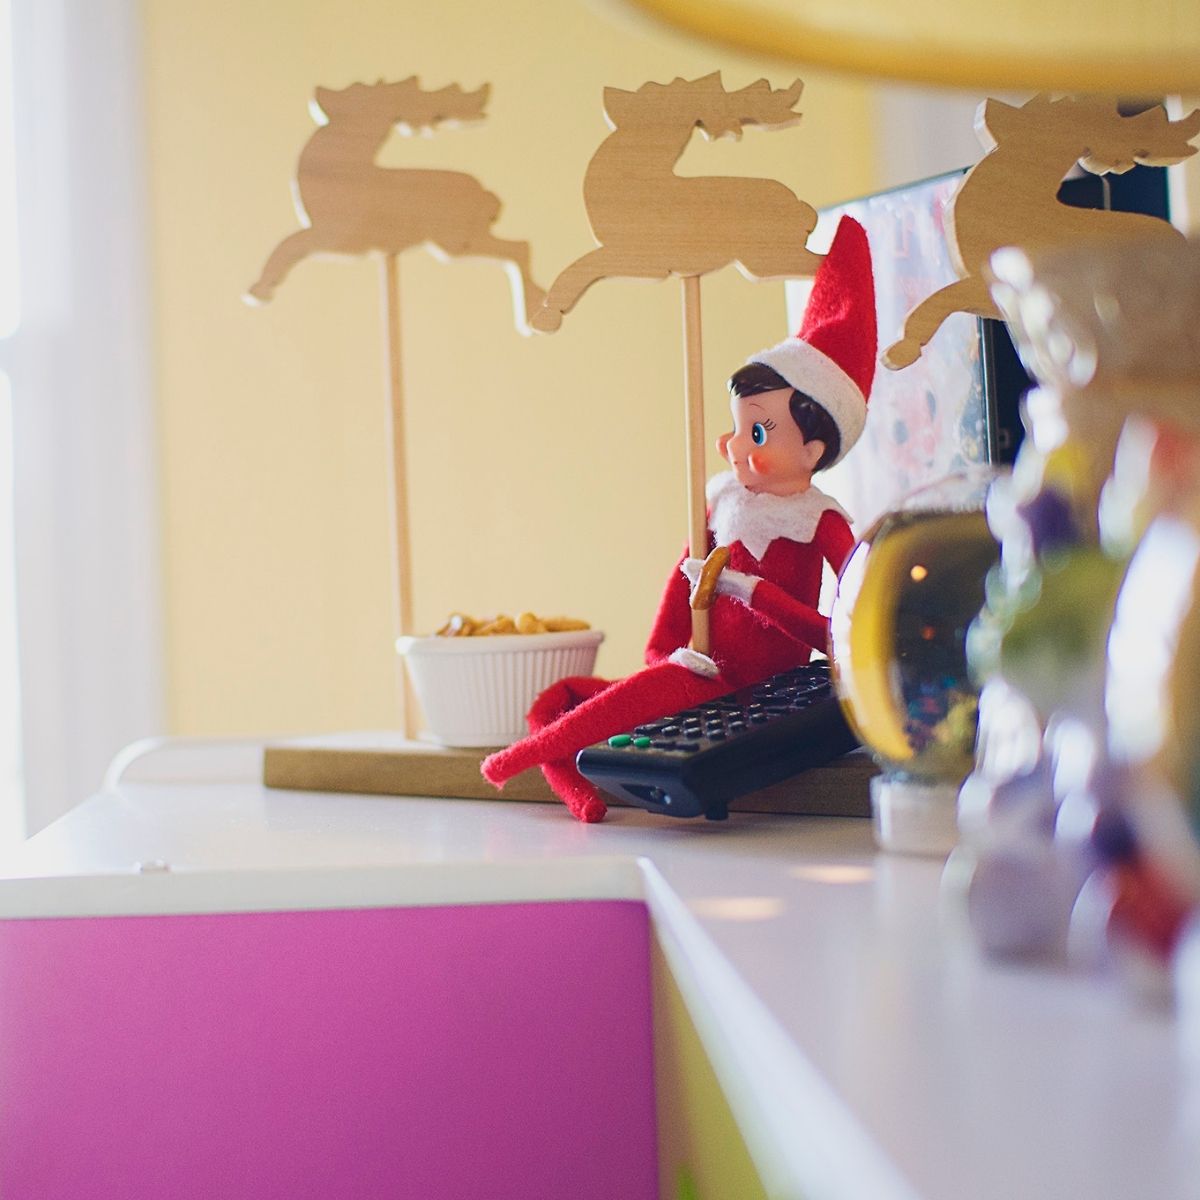 An Elf on the Shelf sits by the tv remote on a shelf.